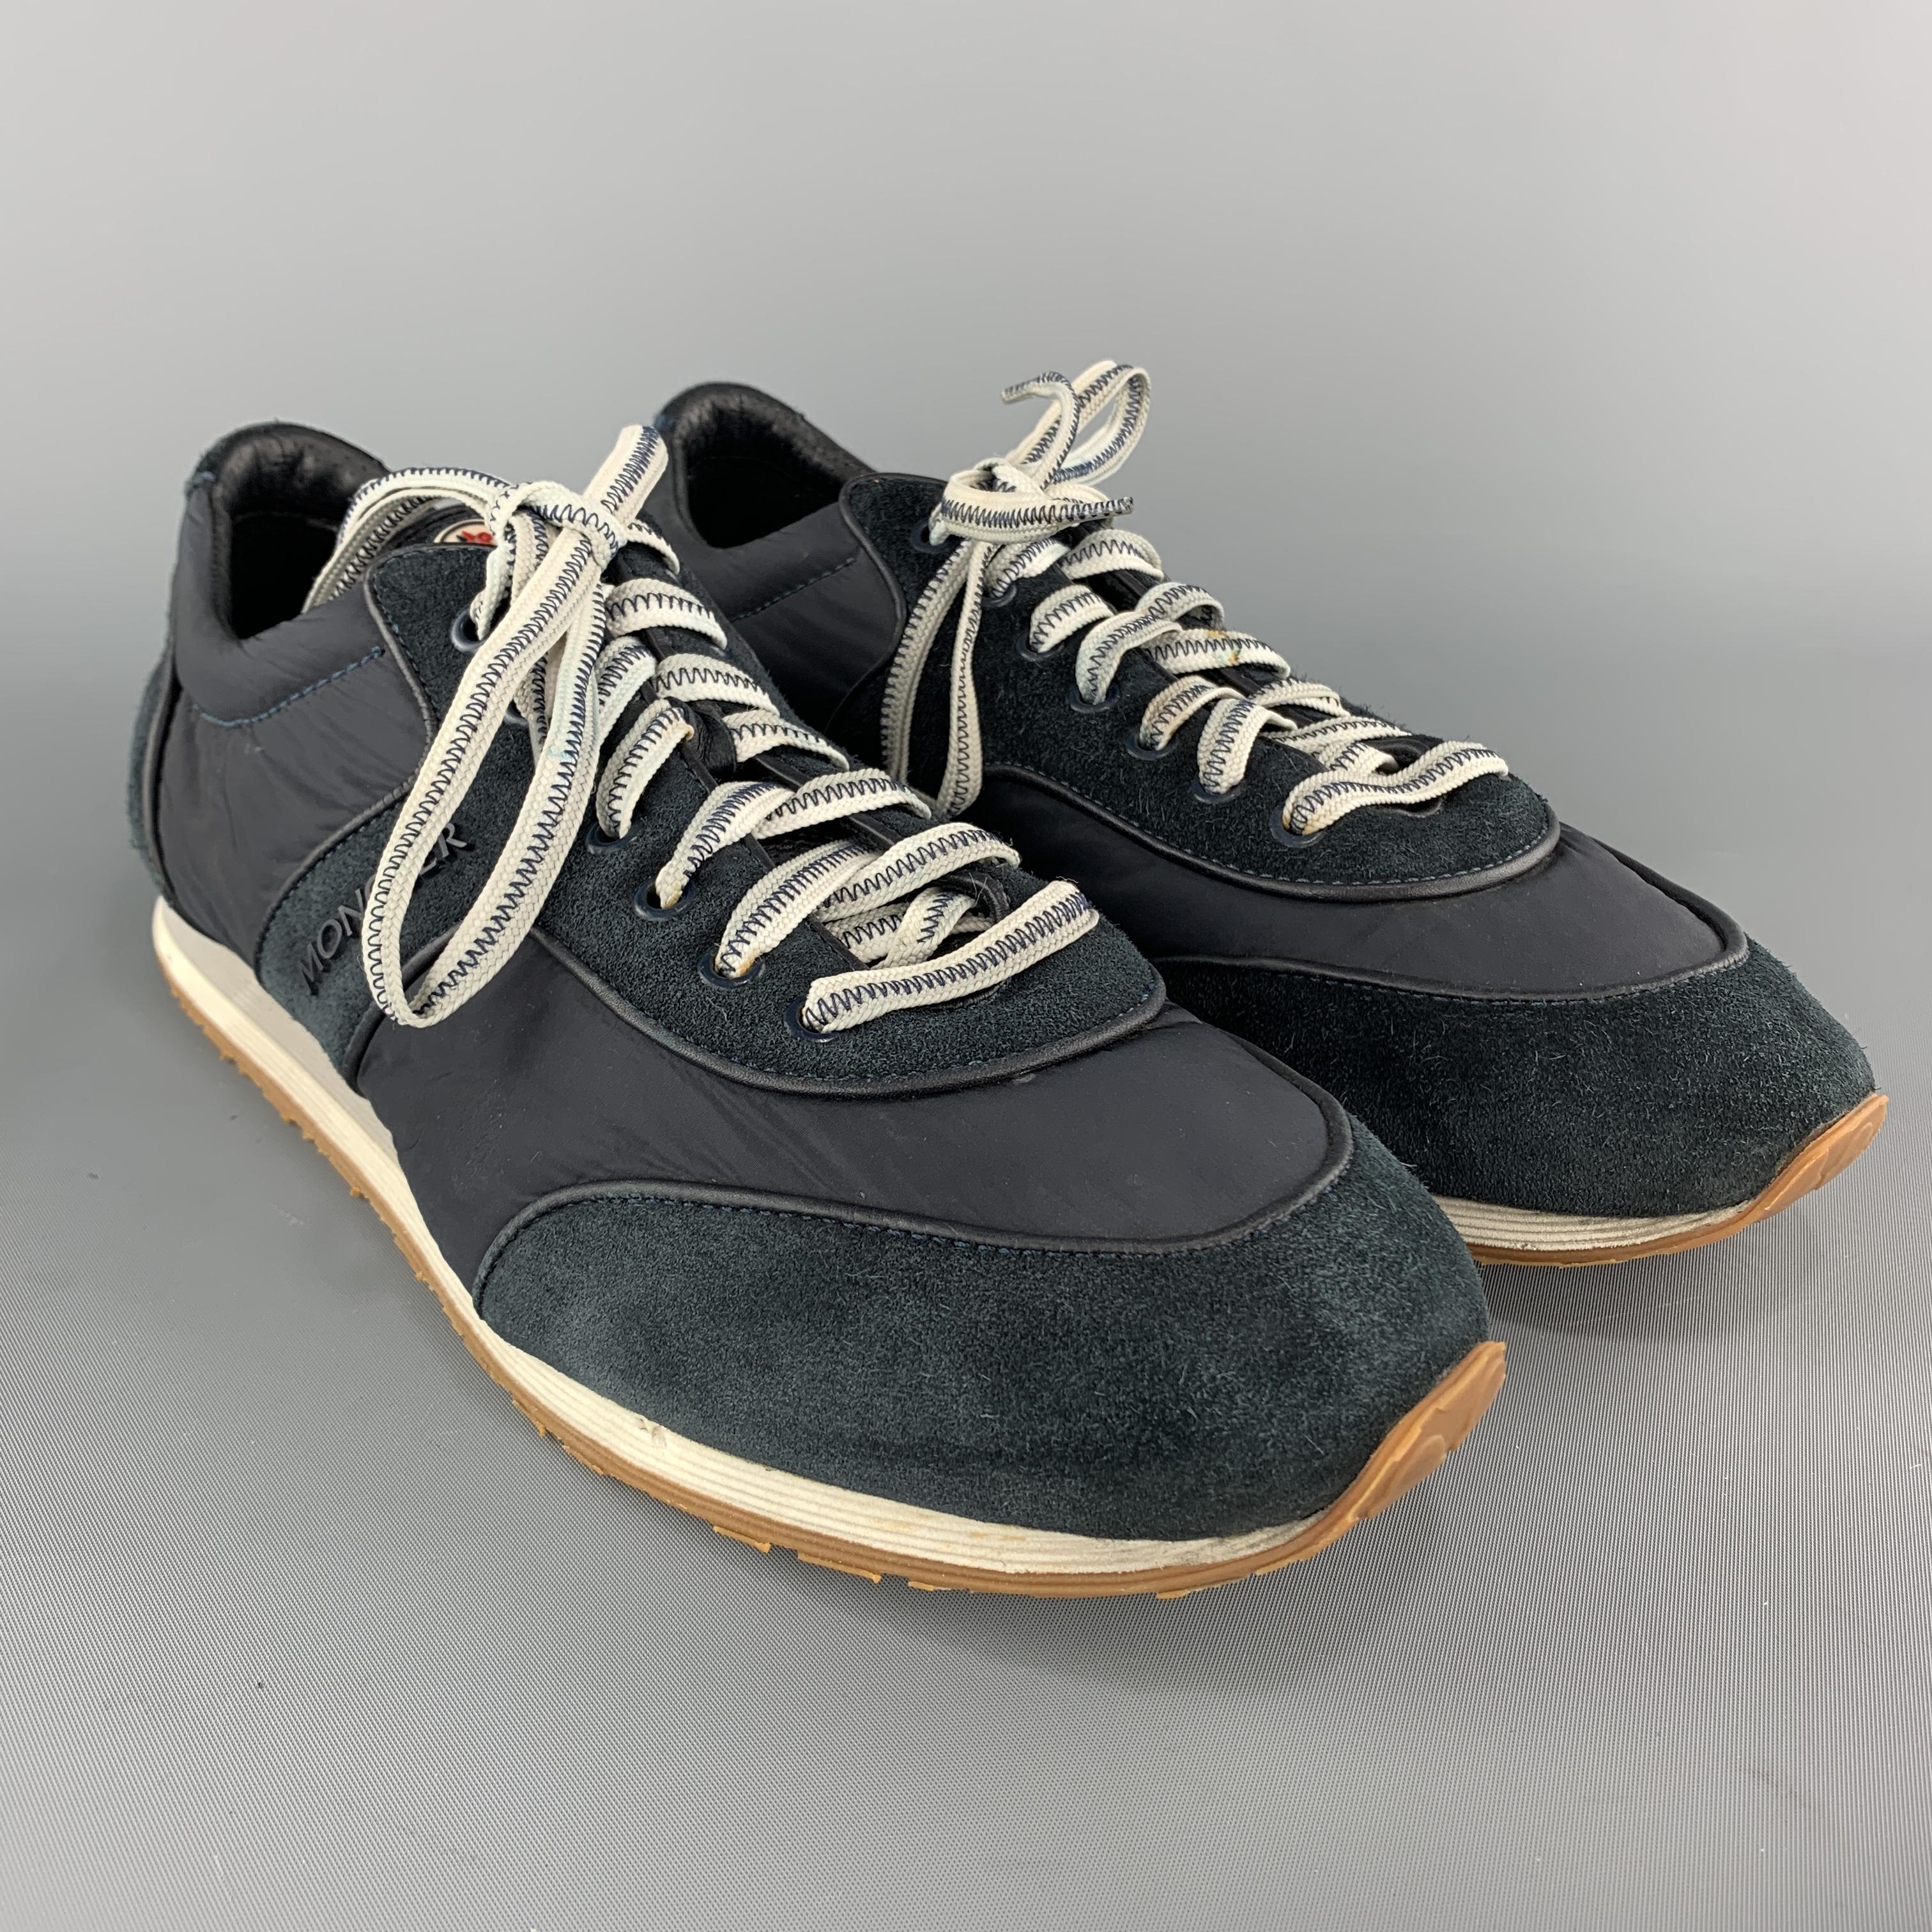 MONCLER trainers come in muted navy blue suede with nylon panels and multi color sole. Made in Italy.

Very Good Pre-Owned Condition.
Marked: IT 43

Outsole: 11.5 x 4 in.